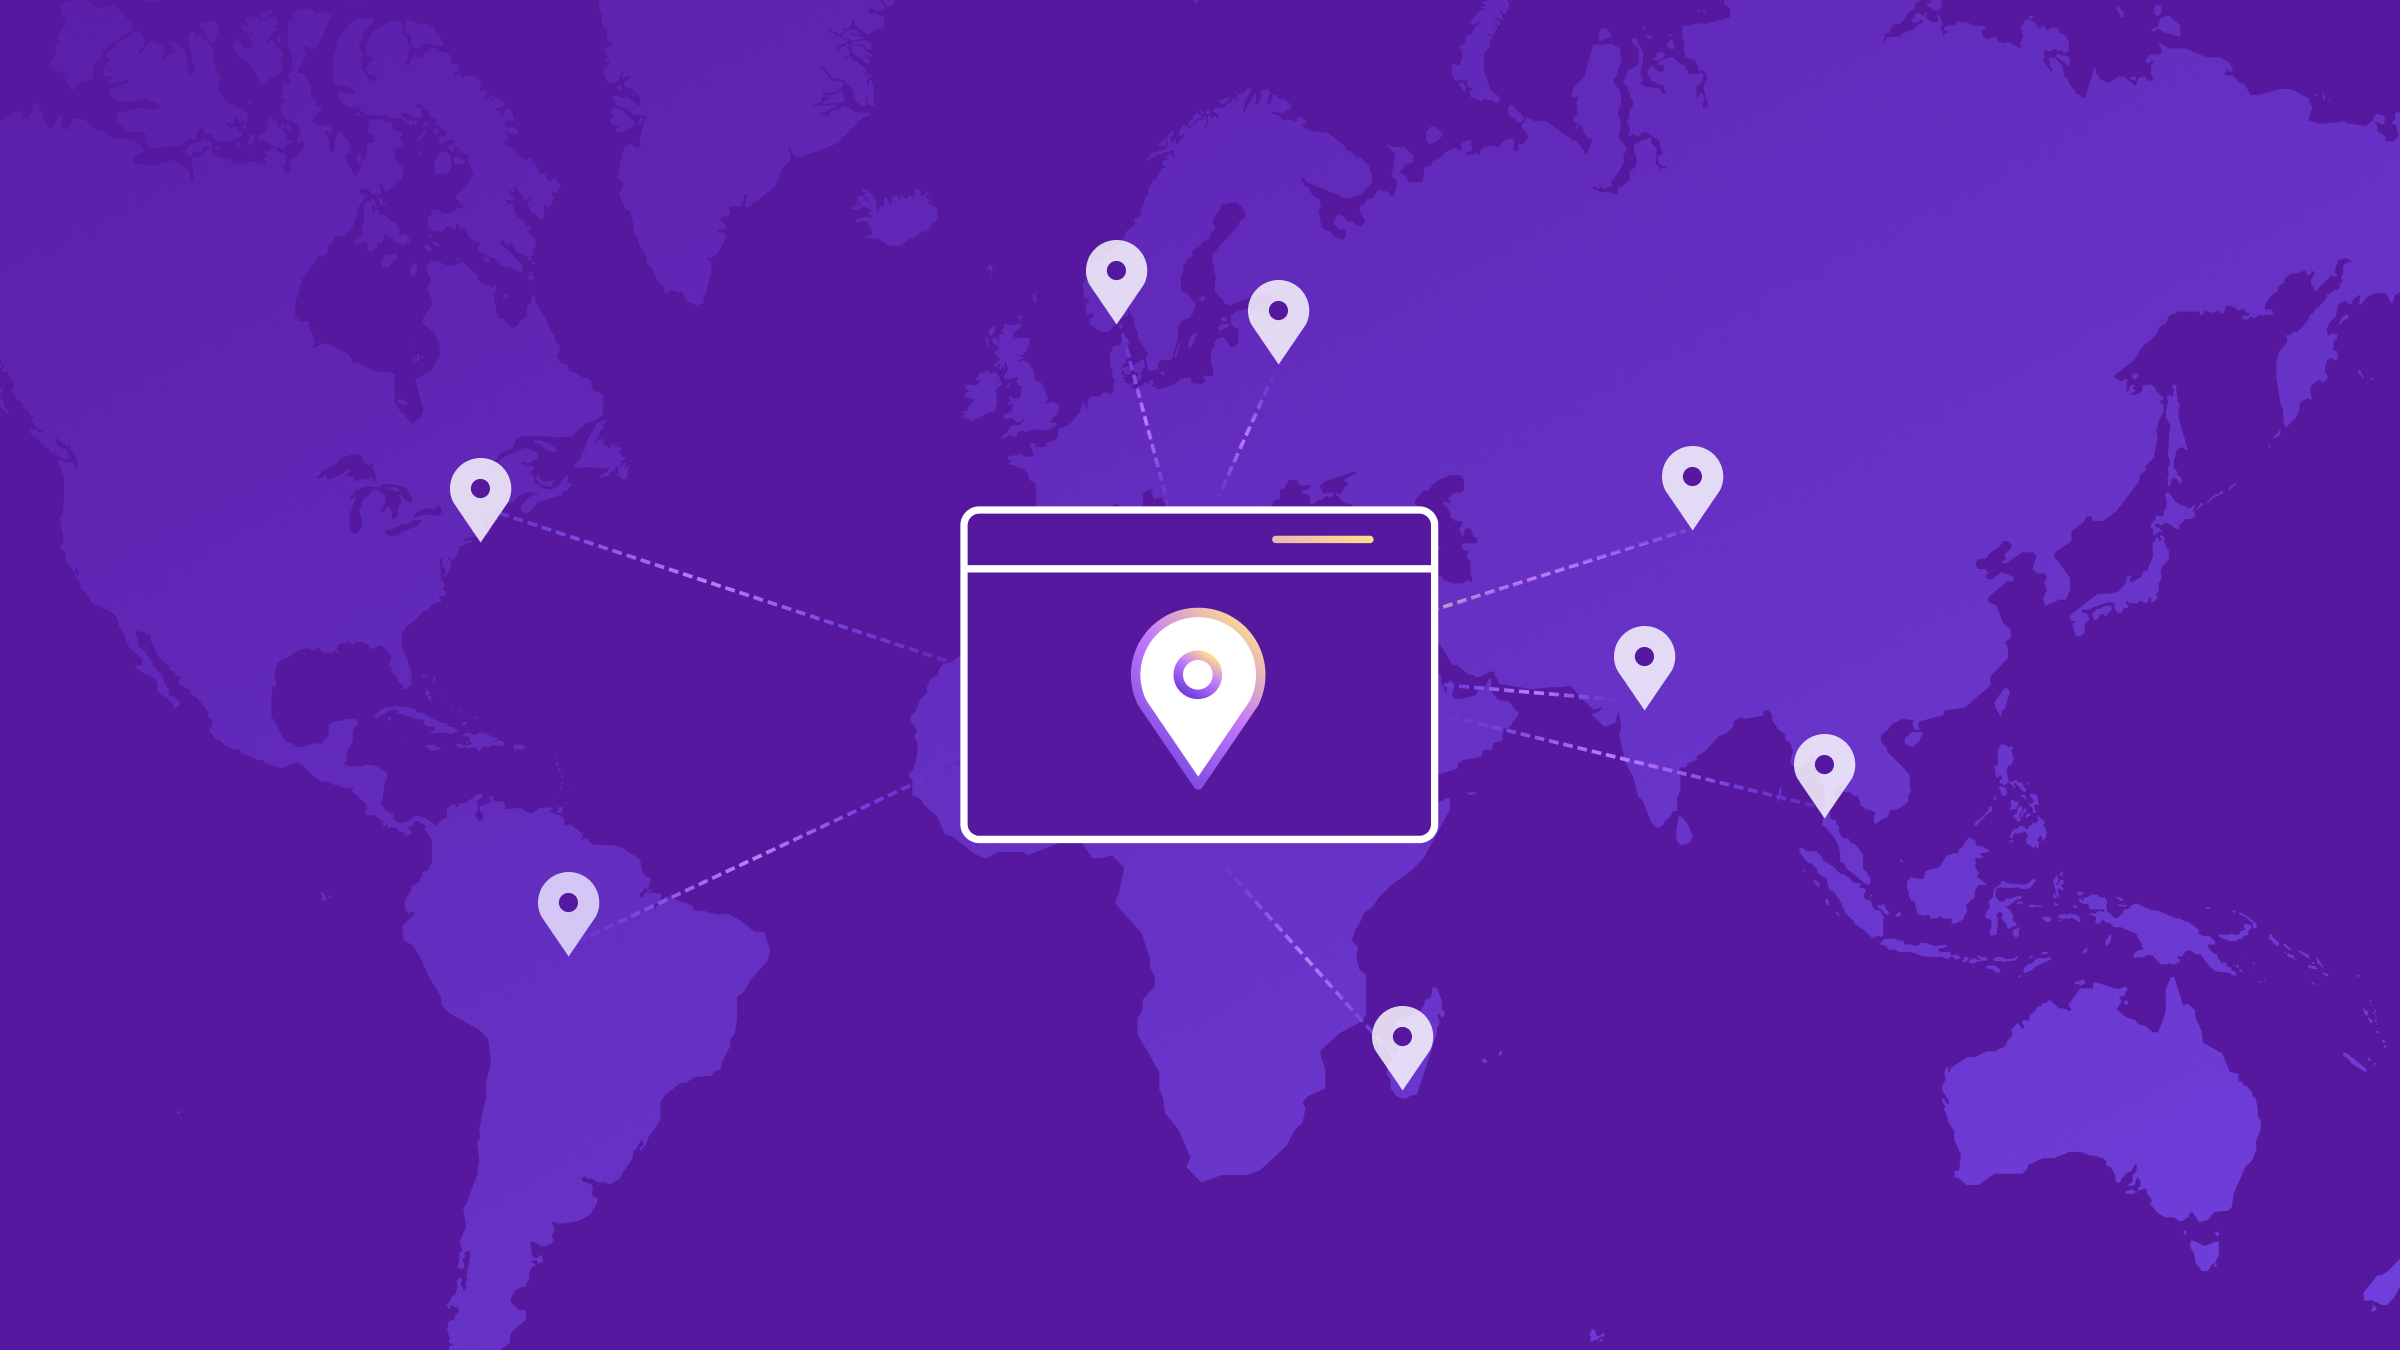 Learn what a localization strategy is and the impact it can have on business results in foreign markets. Plus, get our 10-step process for localization success.